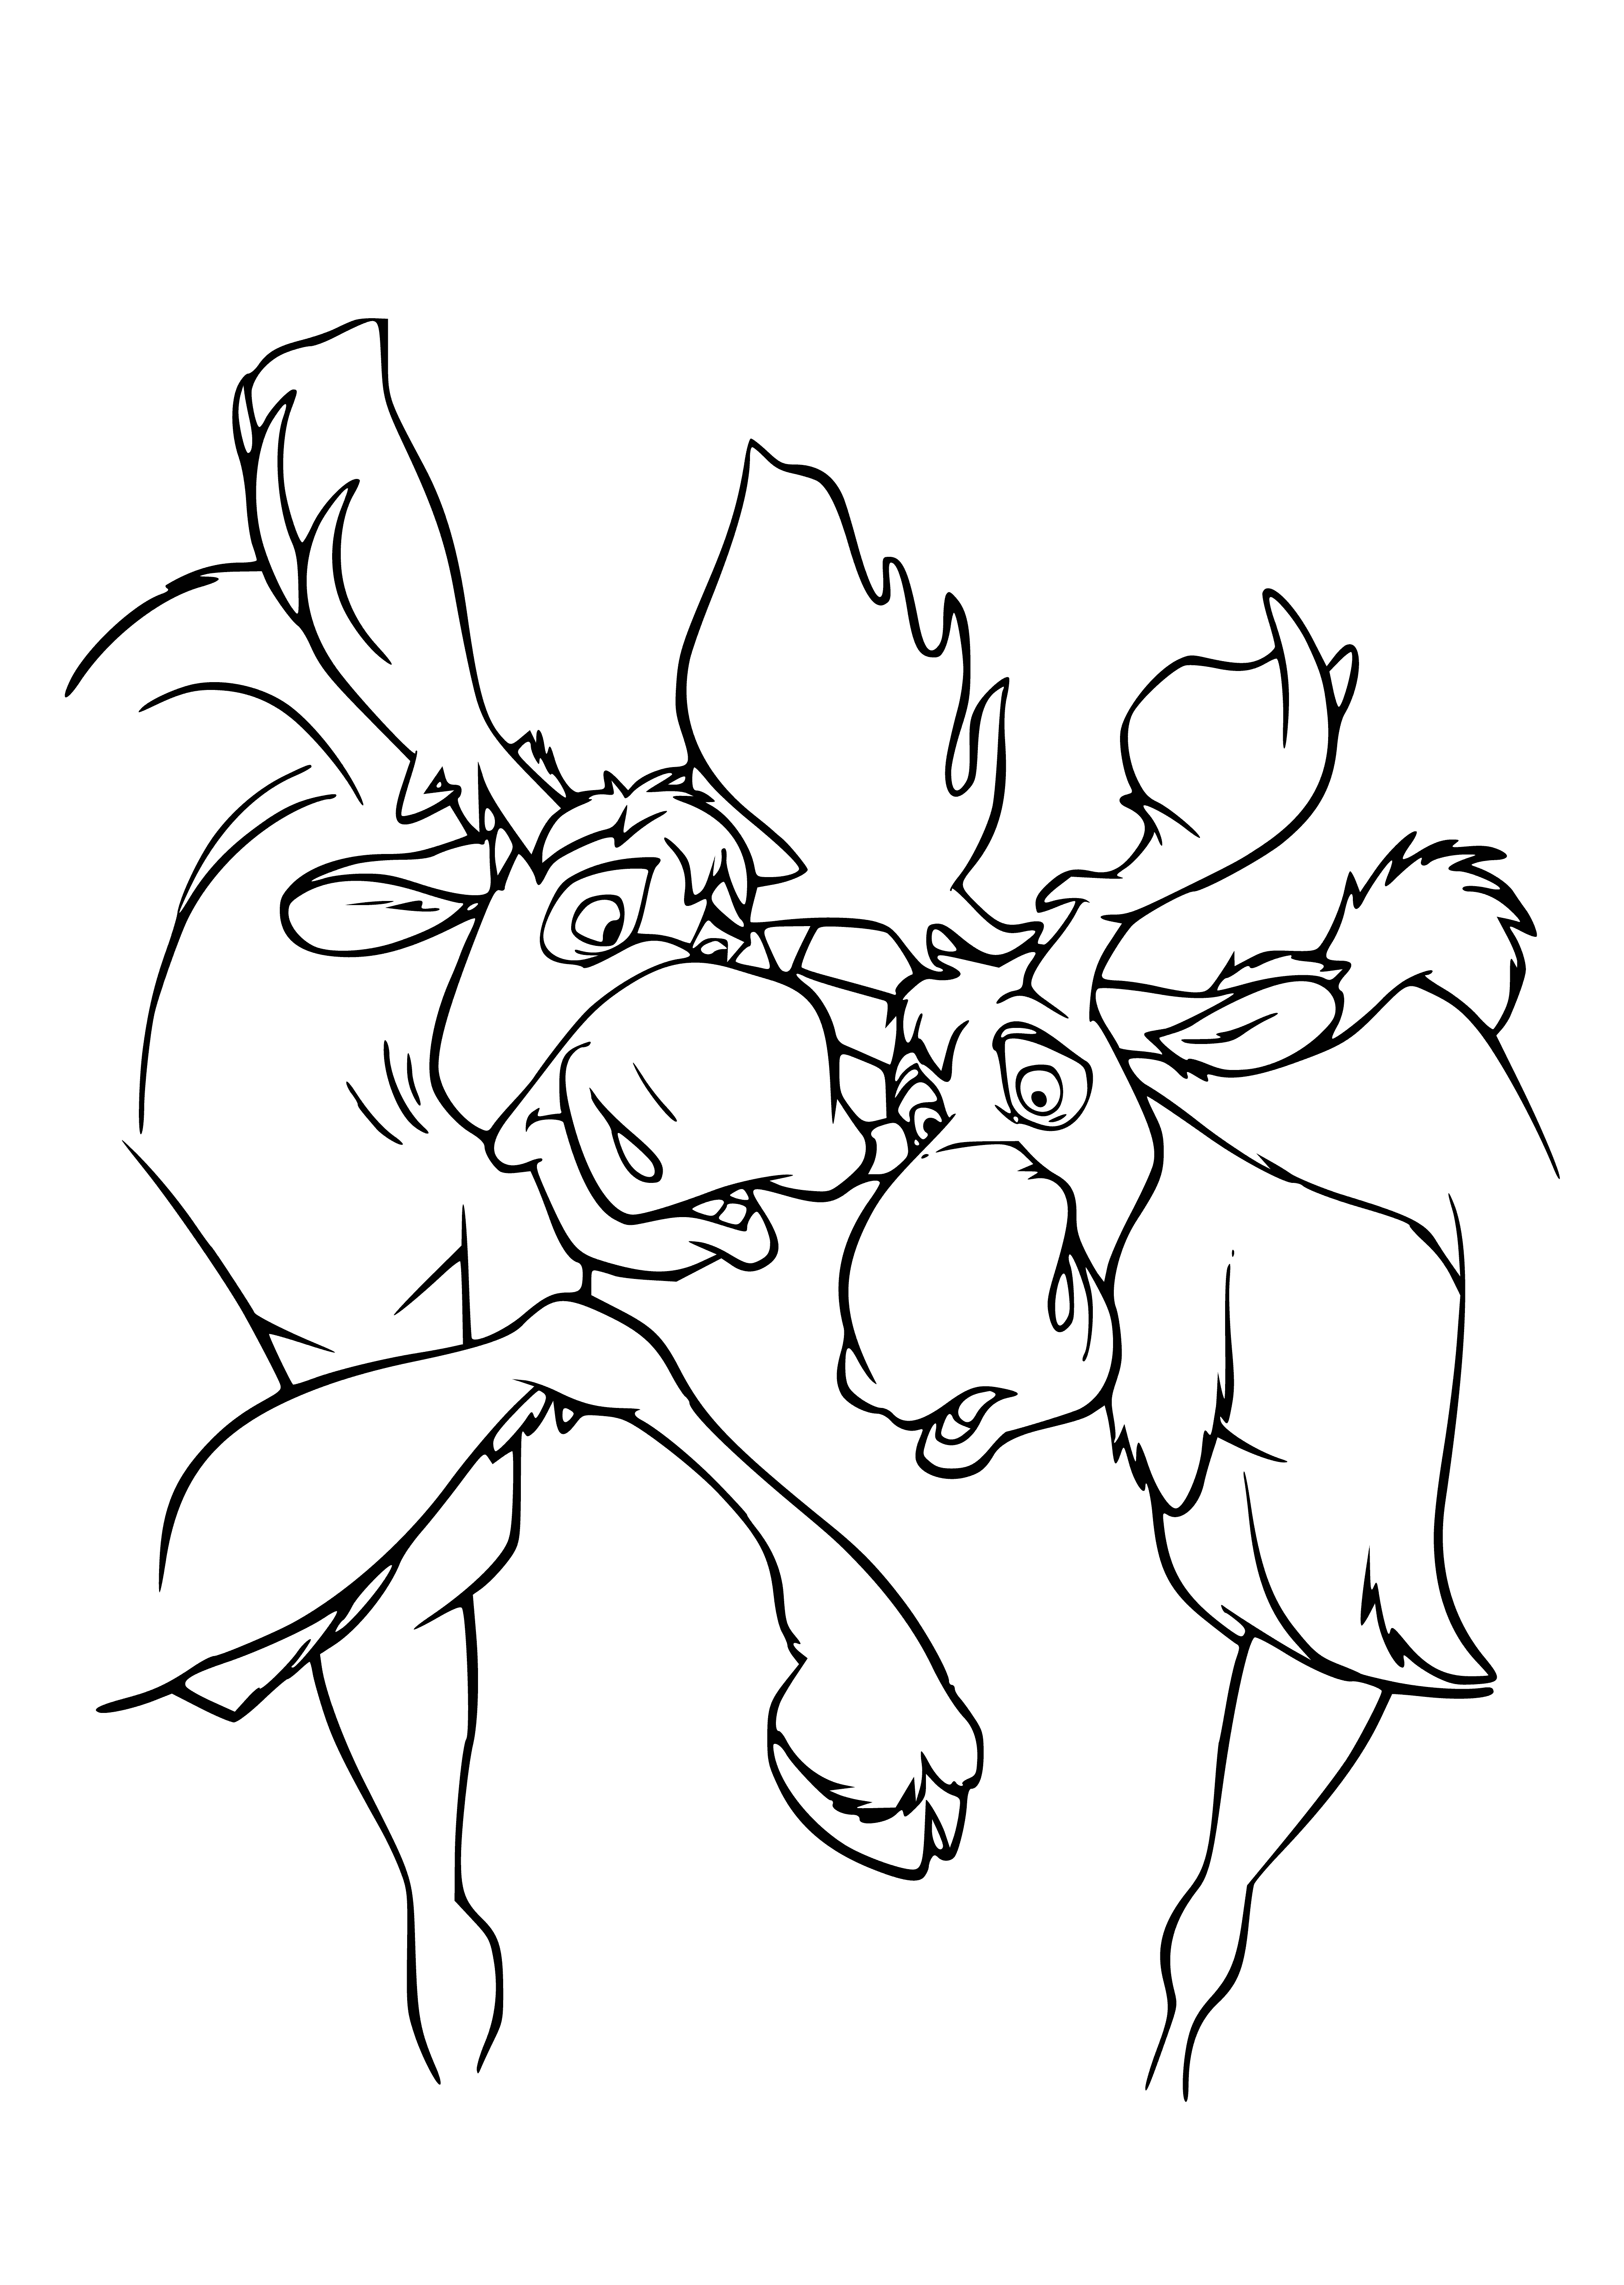 coloring page: Brother bear standing on two legs looks to left at moose standing on all fours and facing him, antlers and green background with trees.